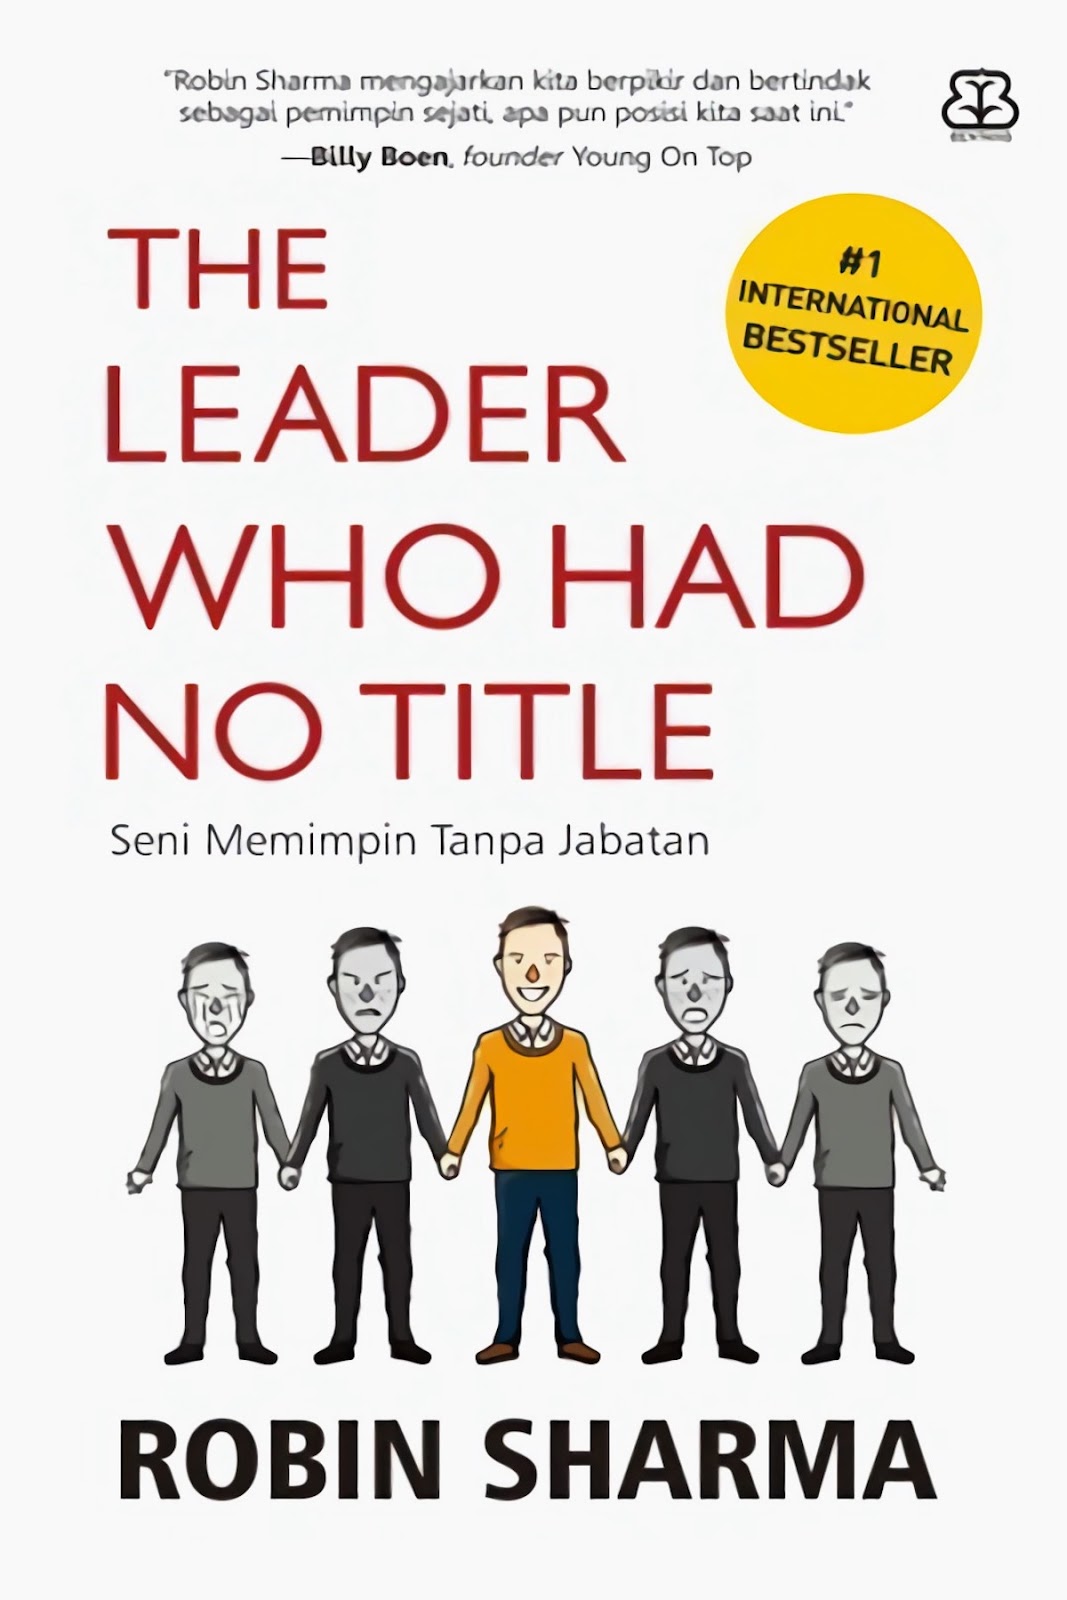 The Leader who had no title